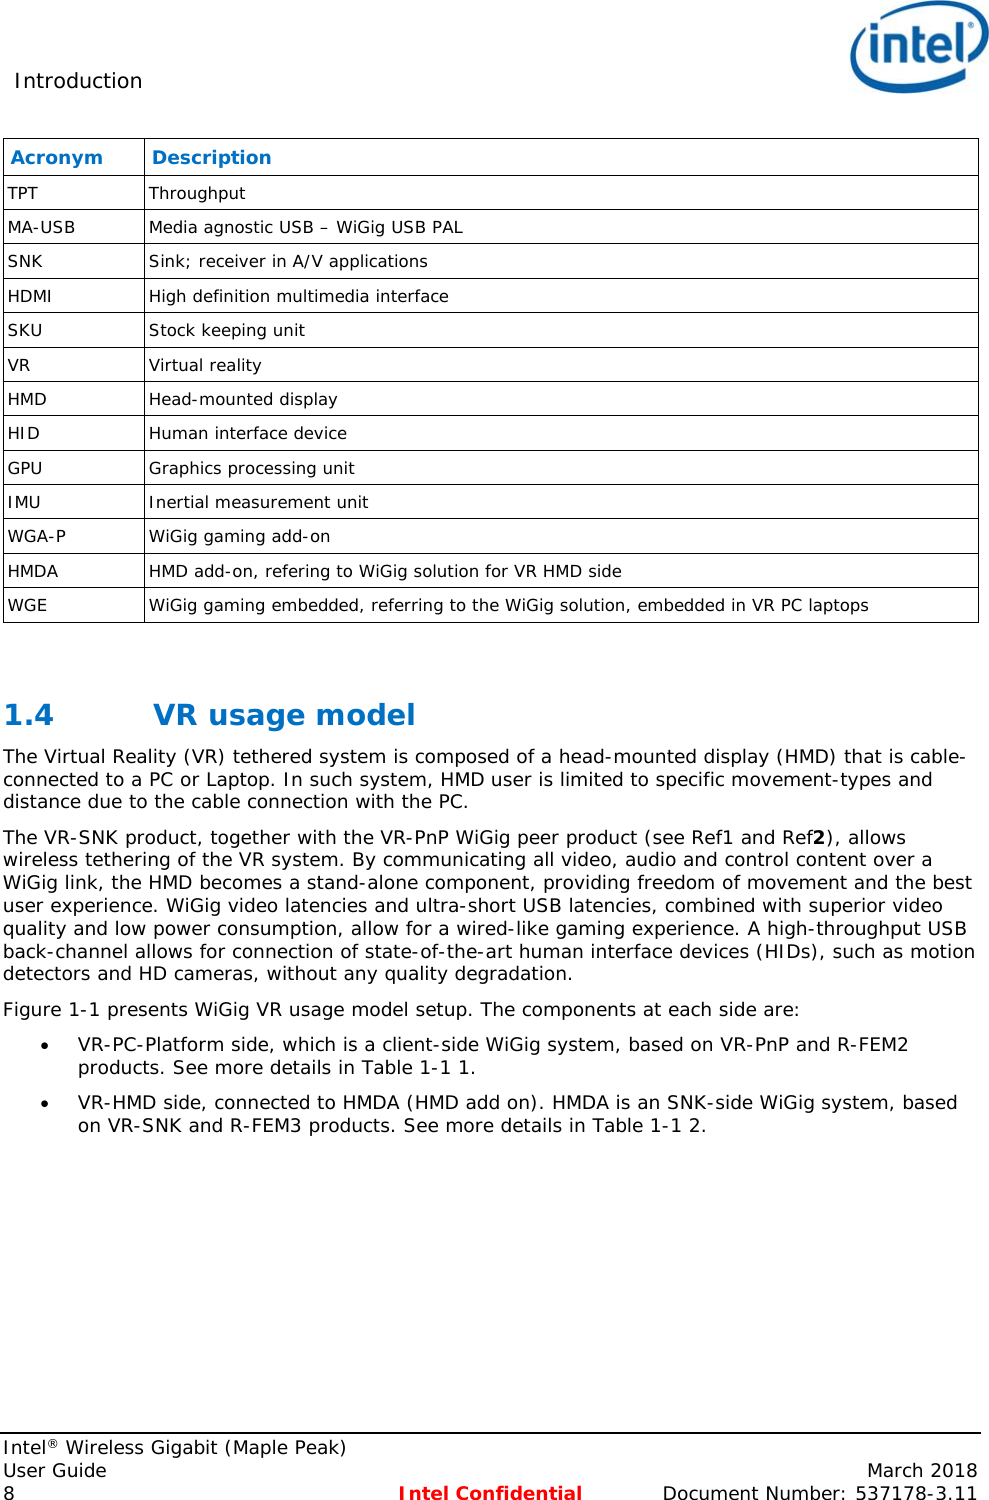 Introduction     Intel® Wireless Gigabit (Maple Peak) User Guide    March 2018 8 Intel Confidential  Document Number: 537178-3.11 Acronym Description TPT Throughput MA-USB Media agnostic USB – WiGig USB PAL SNK Sink; receiver in A/V applications HDMI High definition multimedia interface SKU Stock keeping unit VR Virtual reality HMD Head-mounted display HID  Human interface device GPU  Graphics processing unit IMU Inertial measurement unit WGA-P WiGig gaming add-on HMDA  HMD add-on, refering to WiGig solution for VR HMD side WGE  WiGig gaming embedded, referring to the WiGig solution, embedded in VR PC laptops  1.4 VR usage model The Virtual Reality (VR) tethered system is composed of a head-mounted display (HMD) that is cable-connected to a PC or Laptop. In such system, HMD user is limited to specific movement-types and distance due to the cable connection with the PC. The VR-SNK product, together with the VR-PnP WiGig peer product (see Ref1 and Ref2), allows wireless tethering of the VR system. By communicating all video, audio and control content over a WiGig link, the HMD becomes a stand-alone component, providing freedom of movement and the best user experience. WiGig video latencies and ultra-short USB latencies, combined with superior video quality and low power consumption, allow for a wired-like gaming experience. A high-throughput USB back-channel allows for connection of state-of-the-art human interface devices (HIDs), such as motion detectors and HD cameras, without any quality degradation. Figure 1-1 presents WiGig VR usage model setup. The components at each side are:  VR-PC-Platform side, which is a client-side WiGig system, based on VR-PnP and R-FEM2 products. See more details in Table 1-1 1.  VR-HMD side, connected to HMDA (HMD add on). HMDA is an SNK-side WiGig system, based on VR-SNK and R-FEM3 products. See more details in Table 1-1 2. 